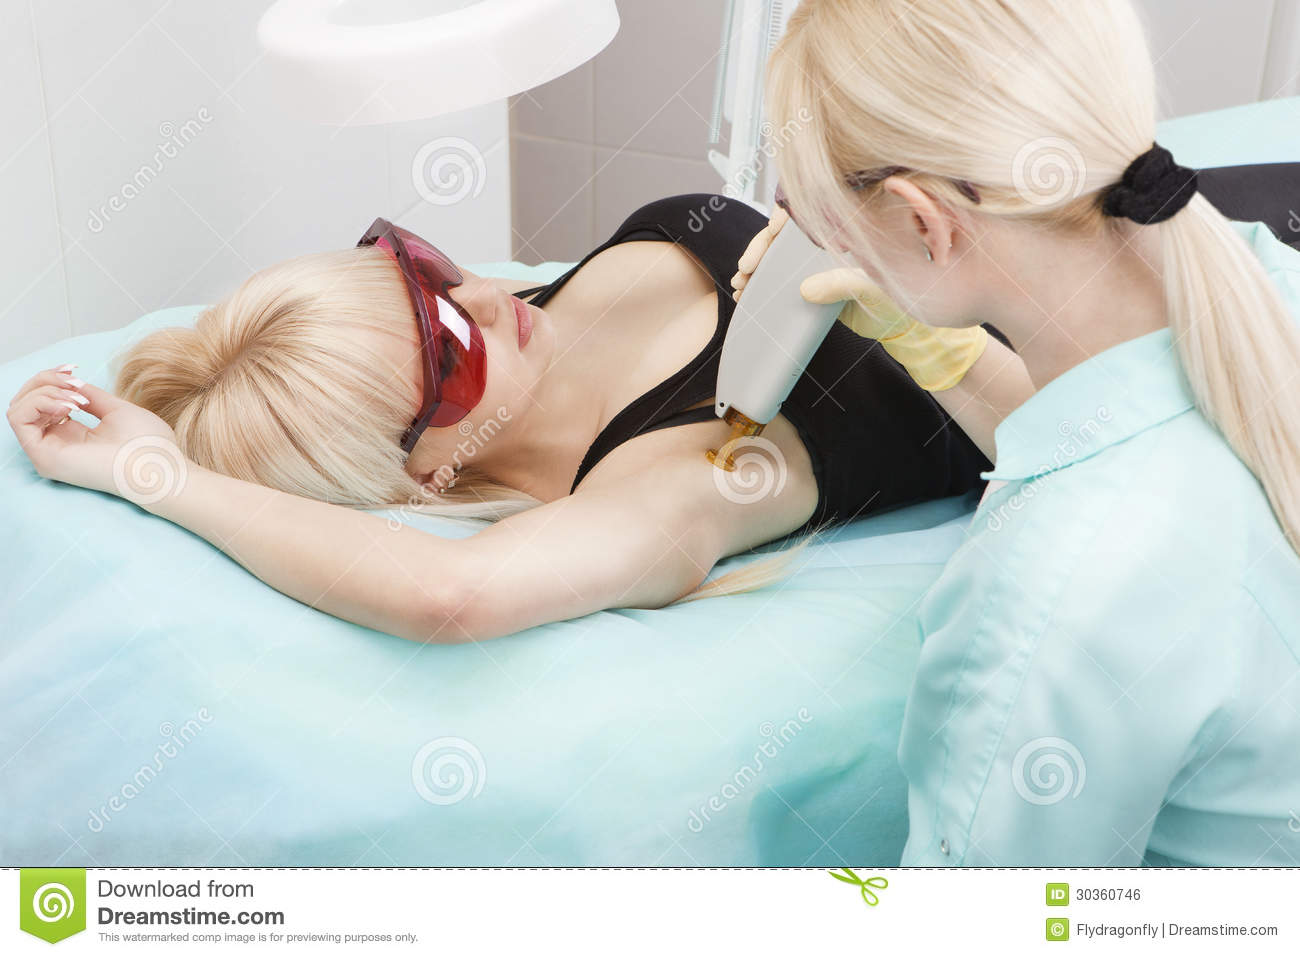 Laser Hair Removal Royalty Free Stock Image   Image  30360746